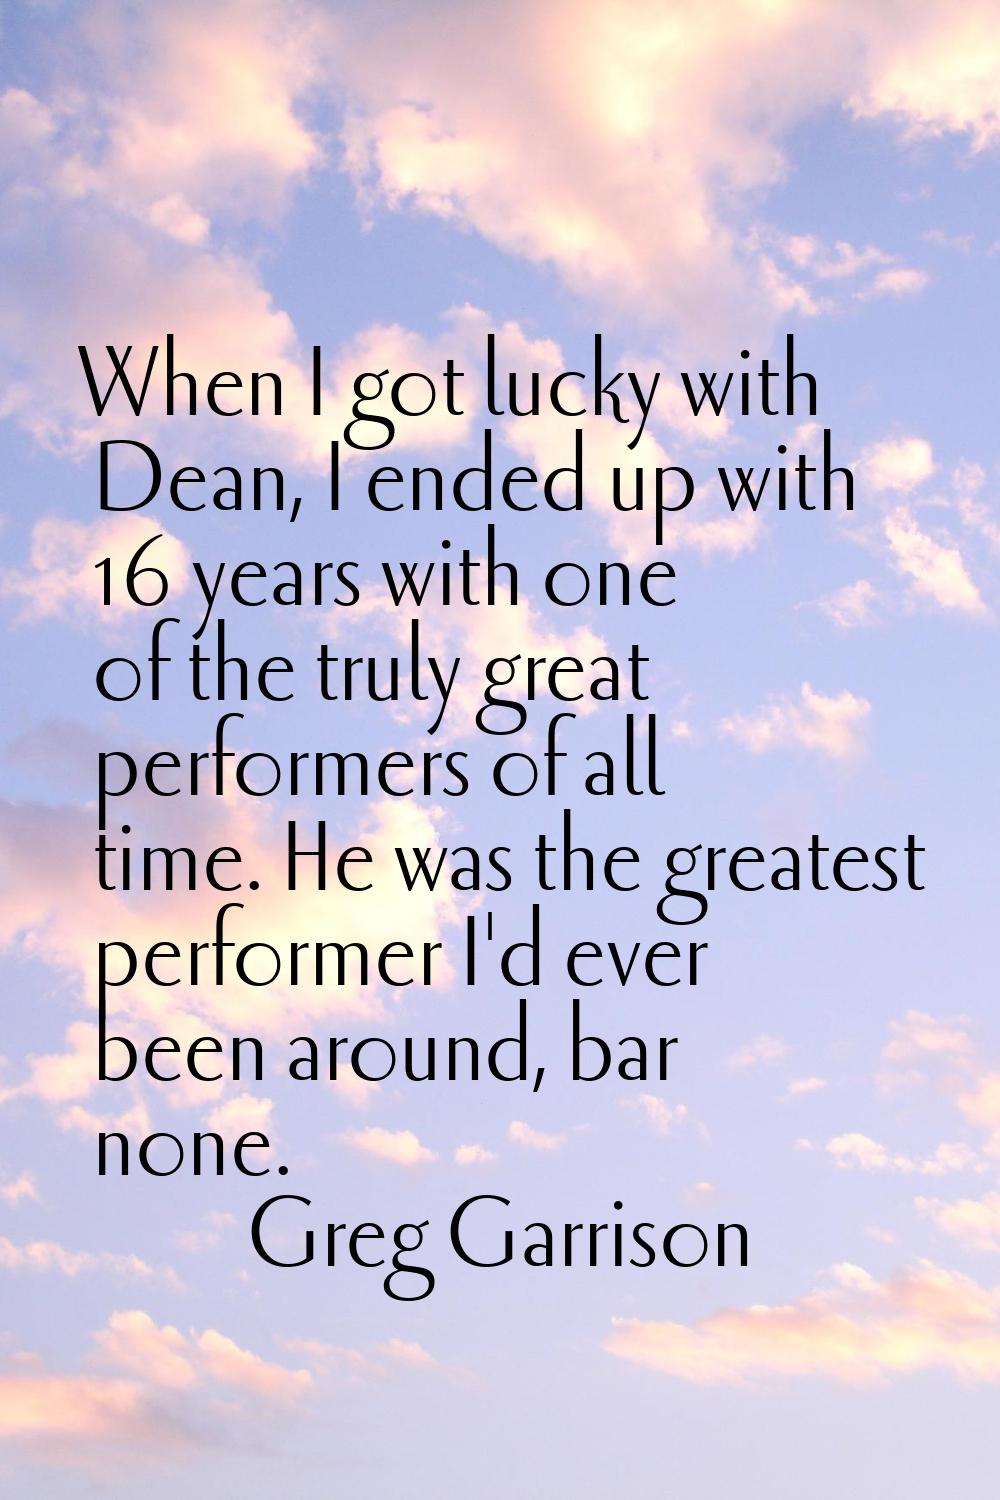 When I got lucky with Dean, I ended up with 16 years with one of the truly great performers of all 